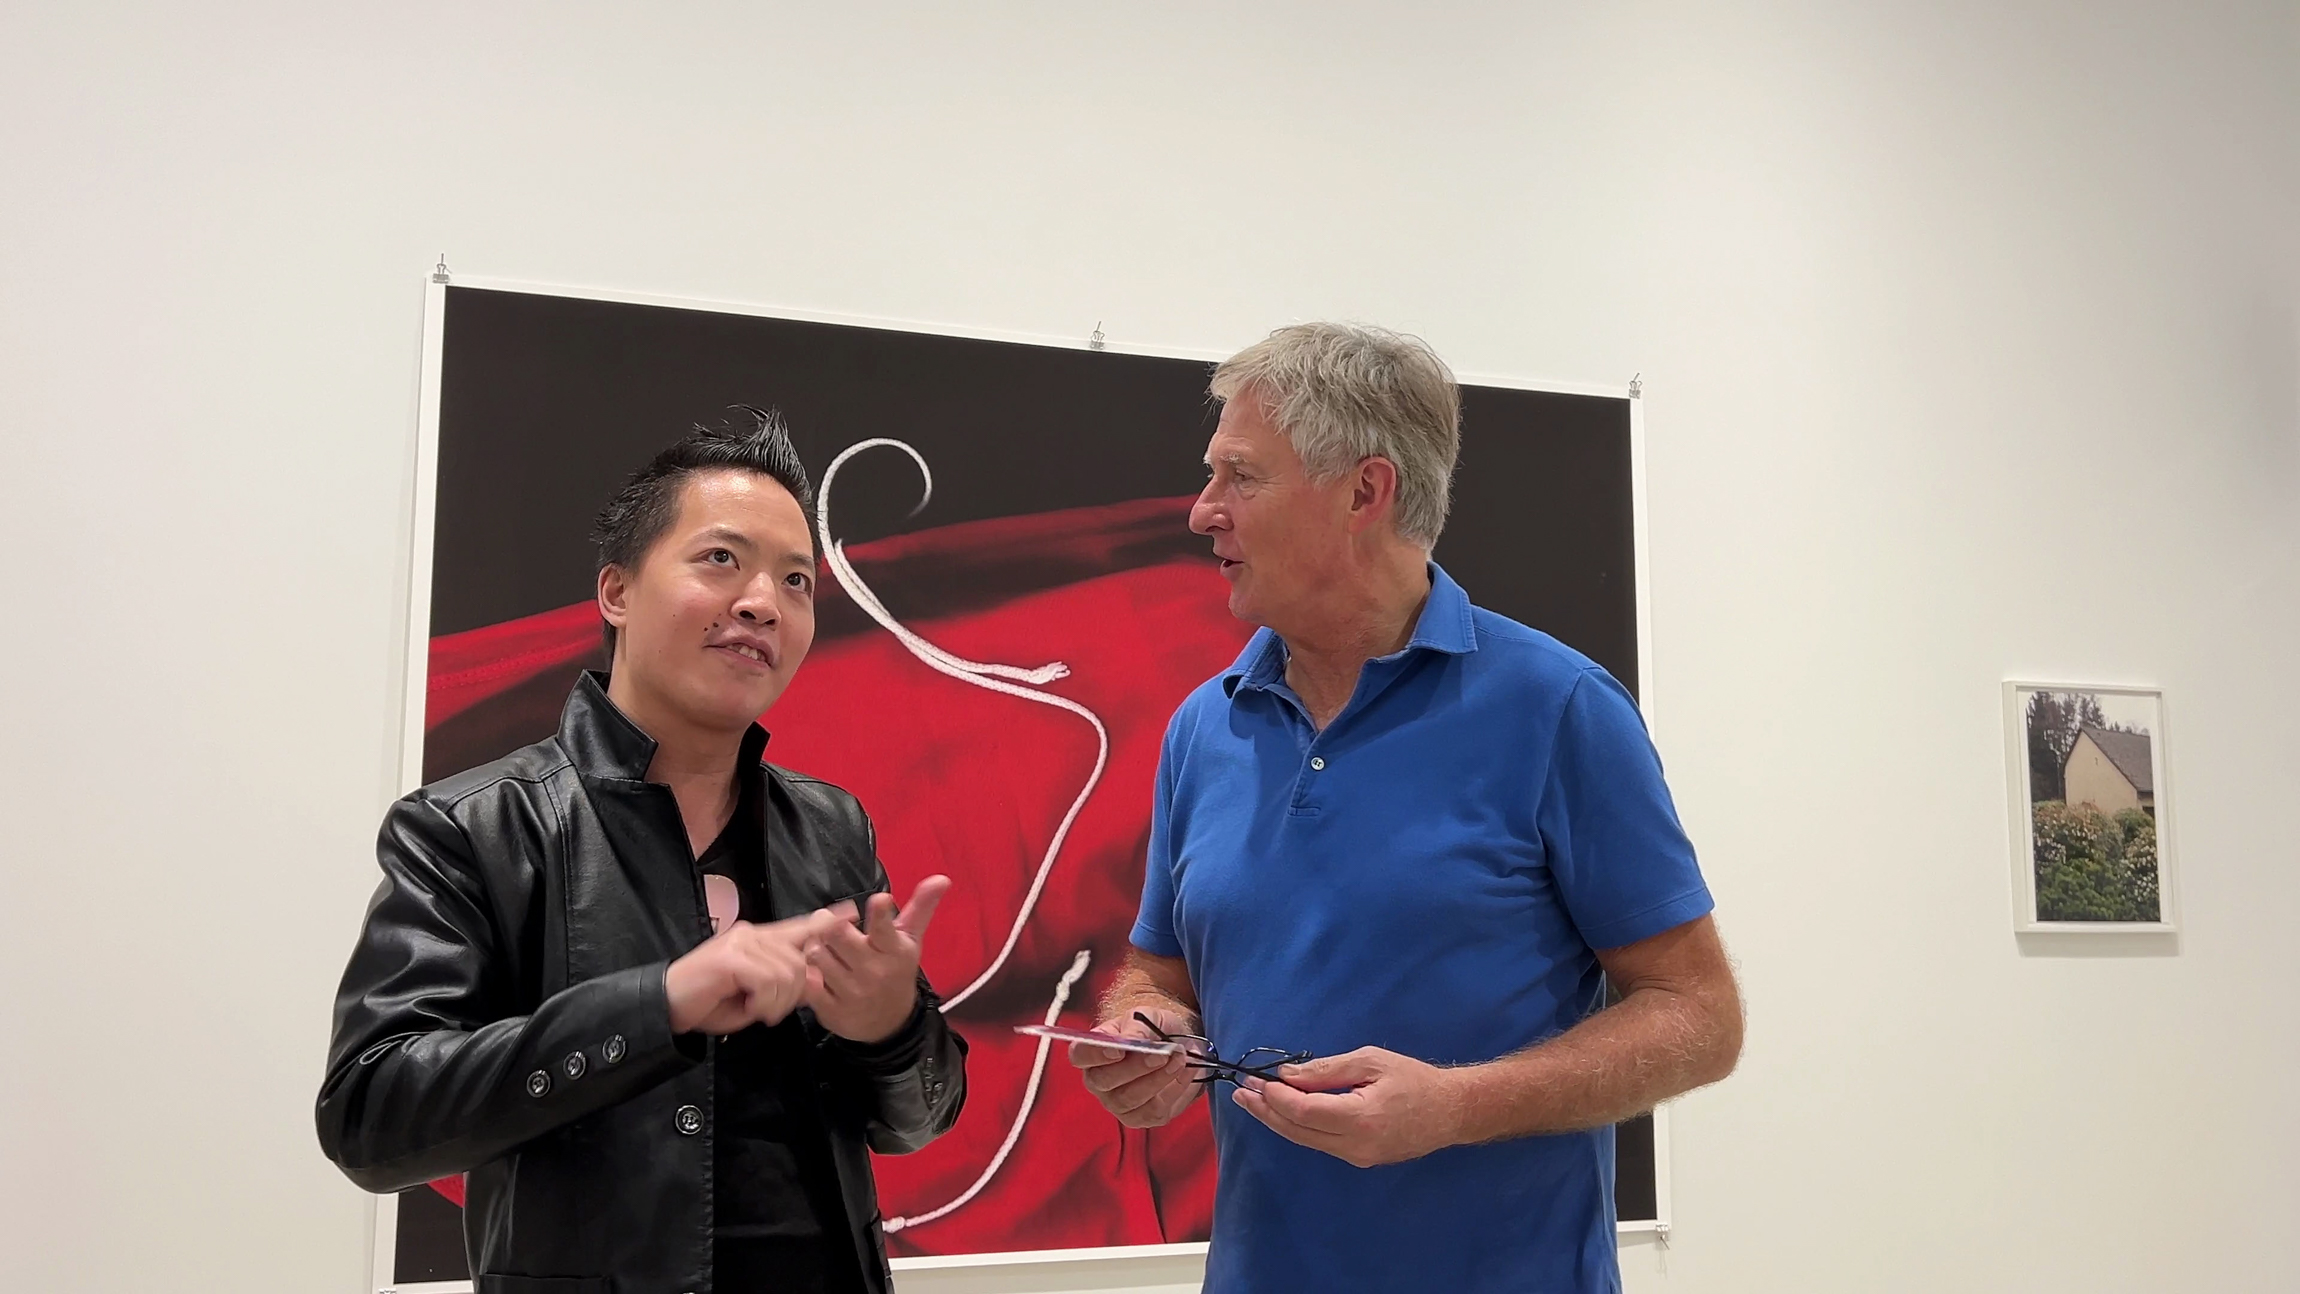 David Zwirner and Michael Andrew Law